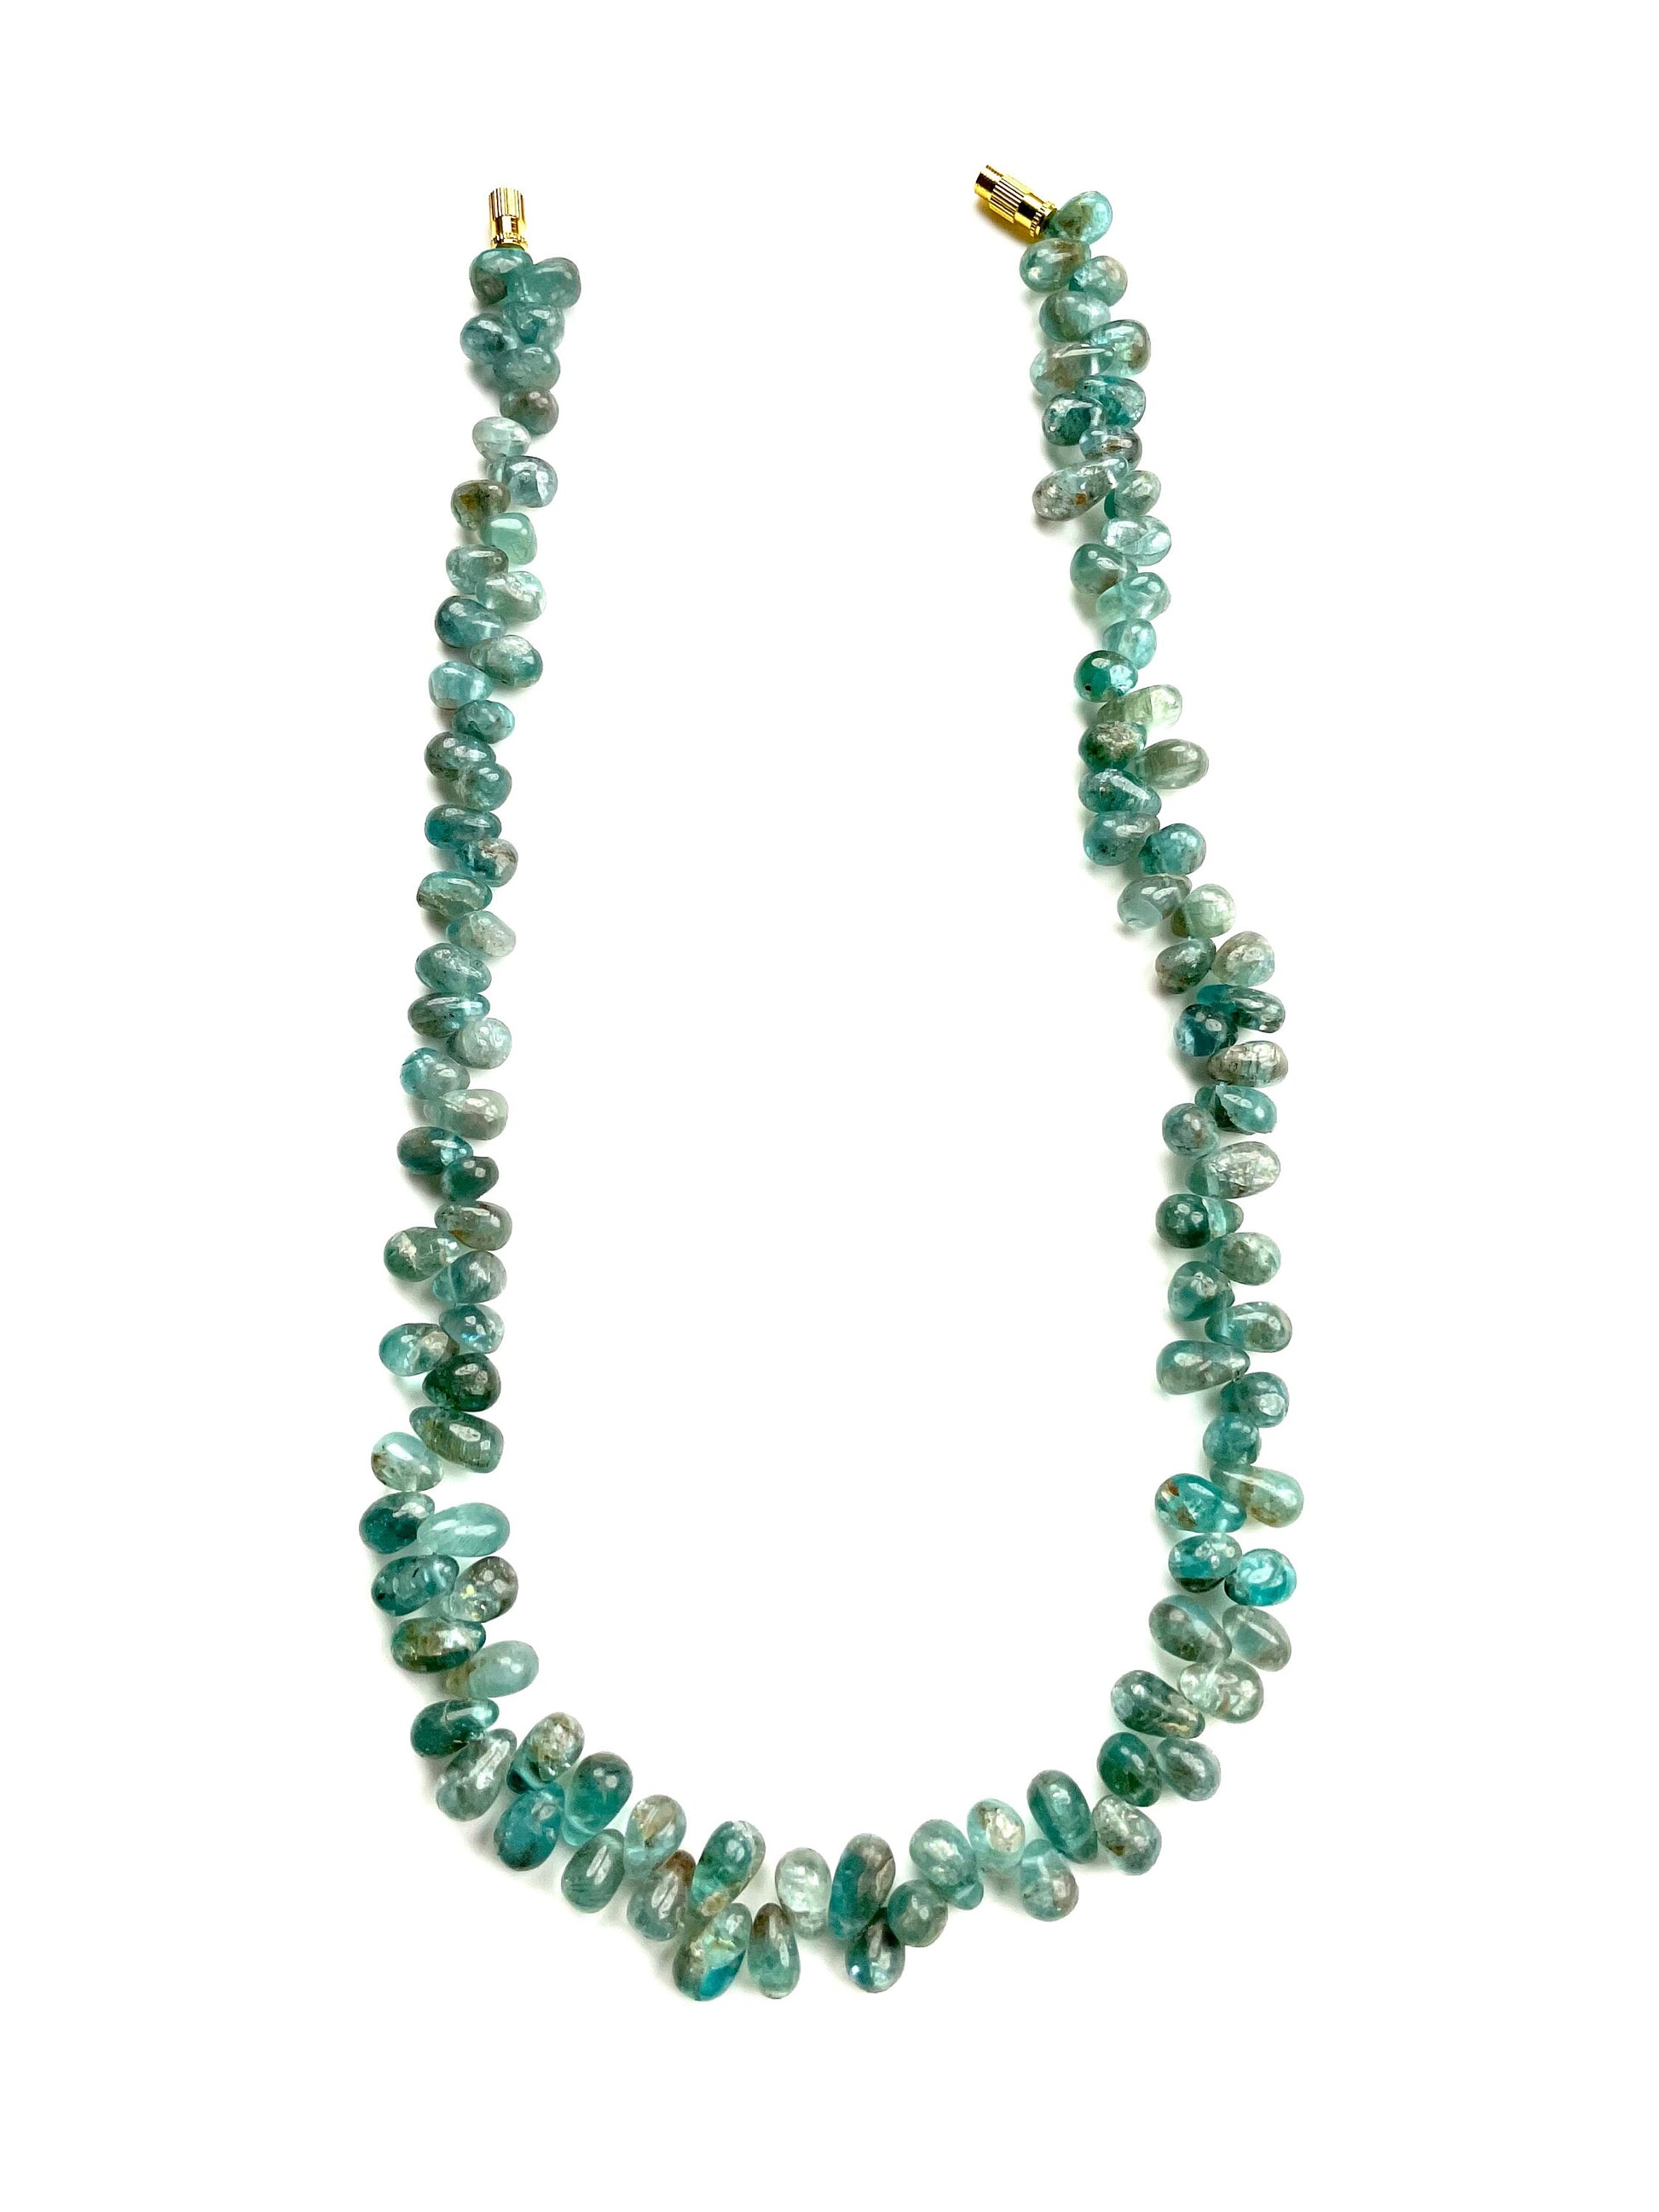 Natural Apatite Teardrop Briolette Smooth Beads